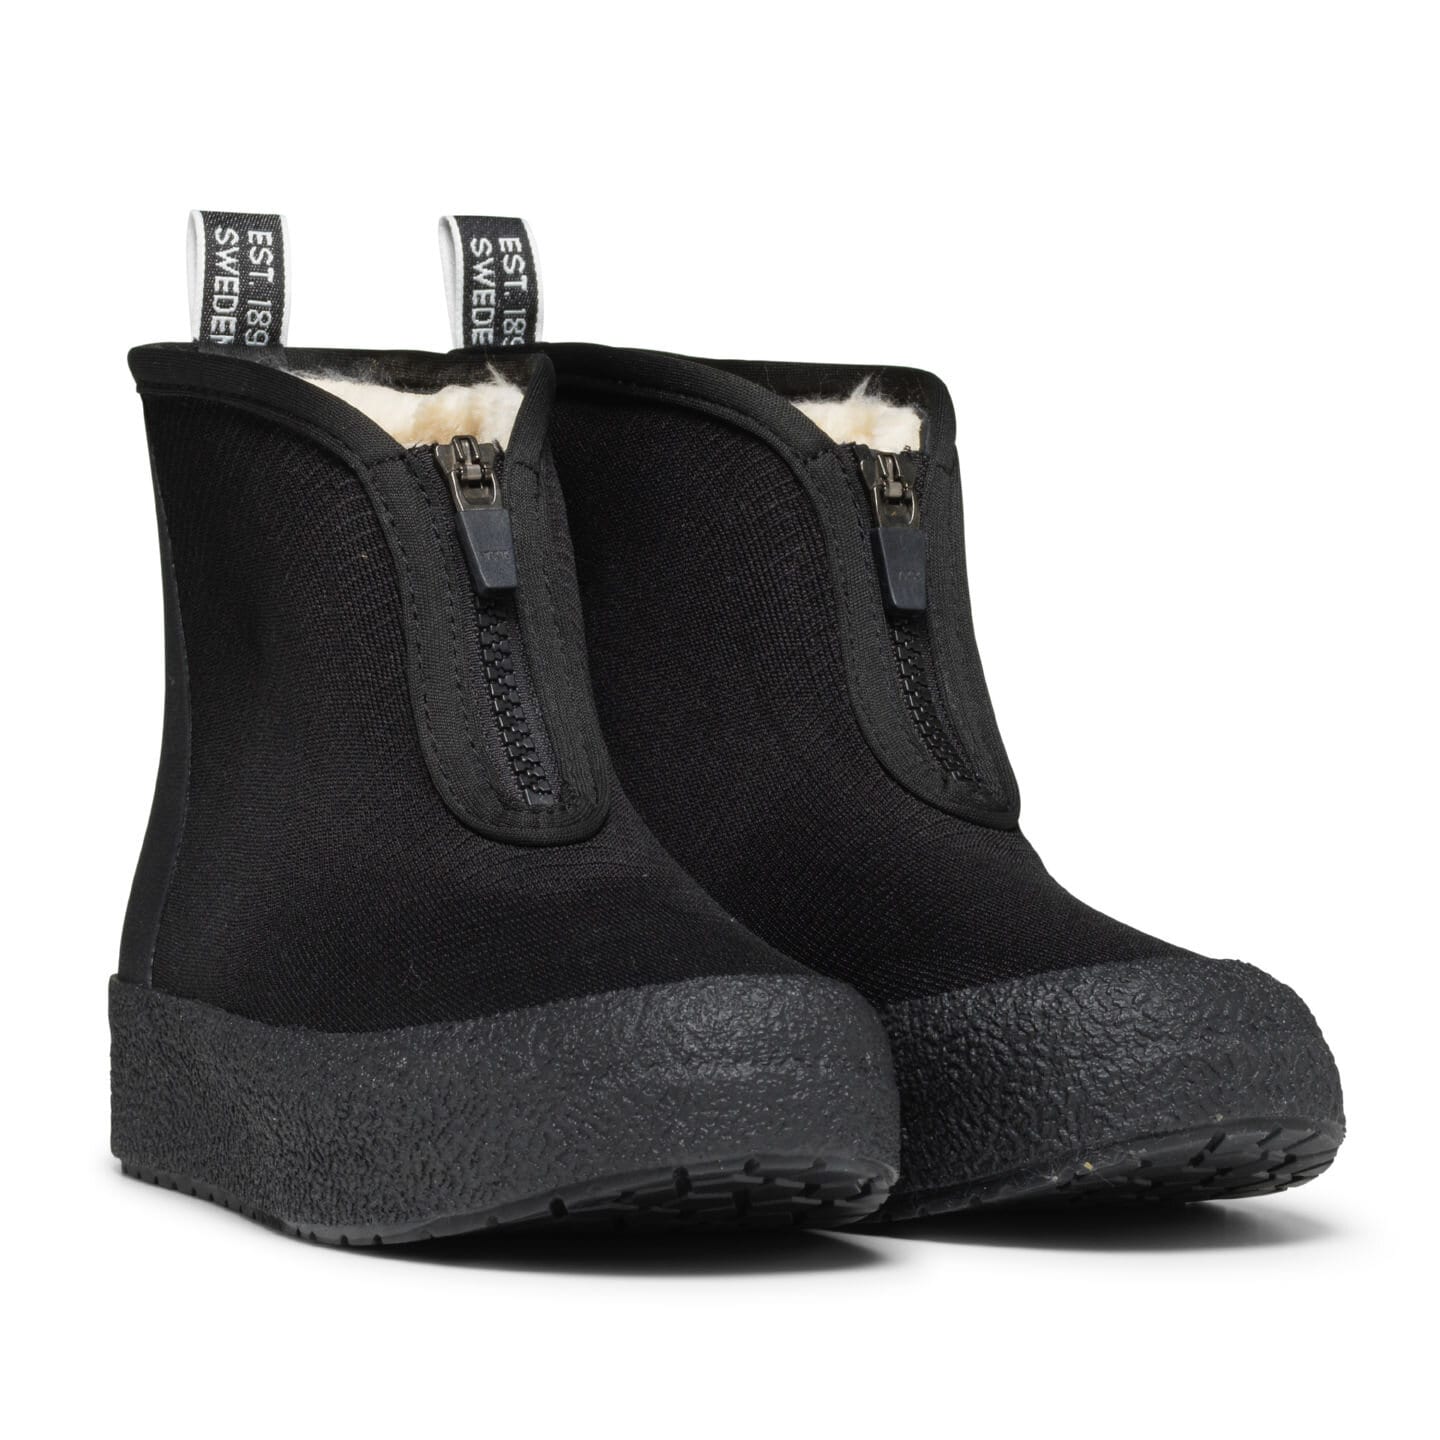 Arka Hybrid waterproof boot for men and women in the colour black